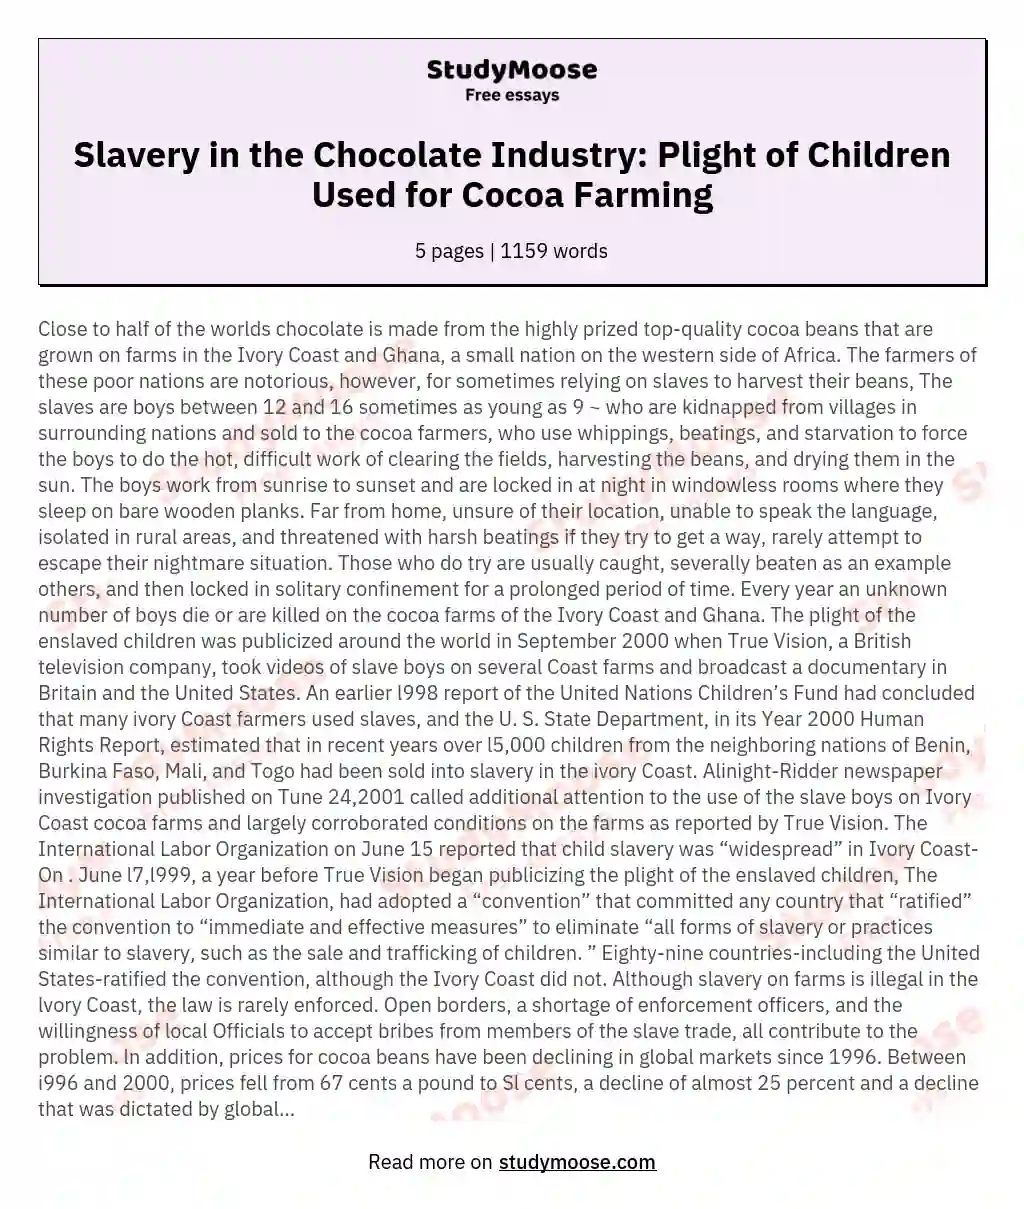 Slavery in the Chocolate Industry: Plight of Children Used for Cocoa Farming